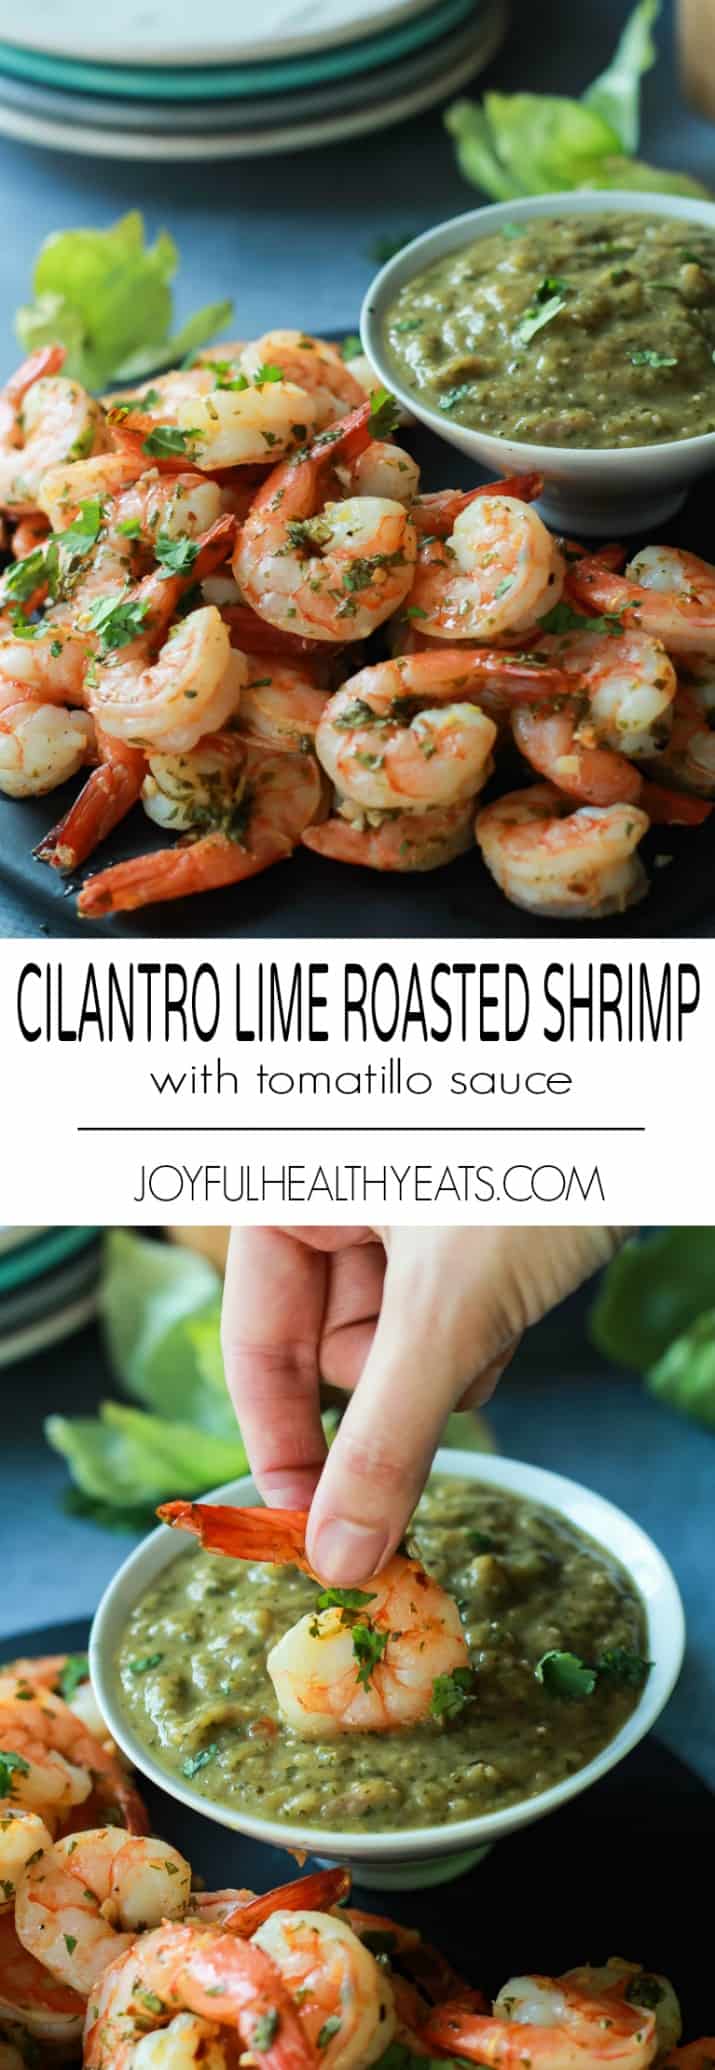 Pinterest collage for Cilantro Lime Roasted Shrimp with tomatillo sauce recipe